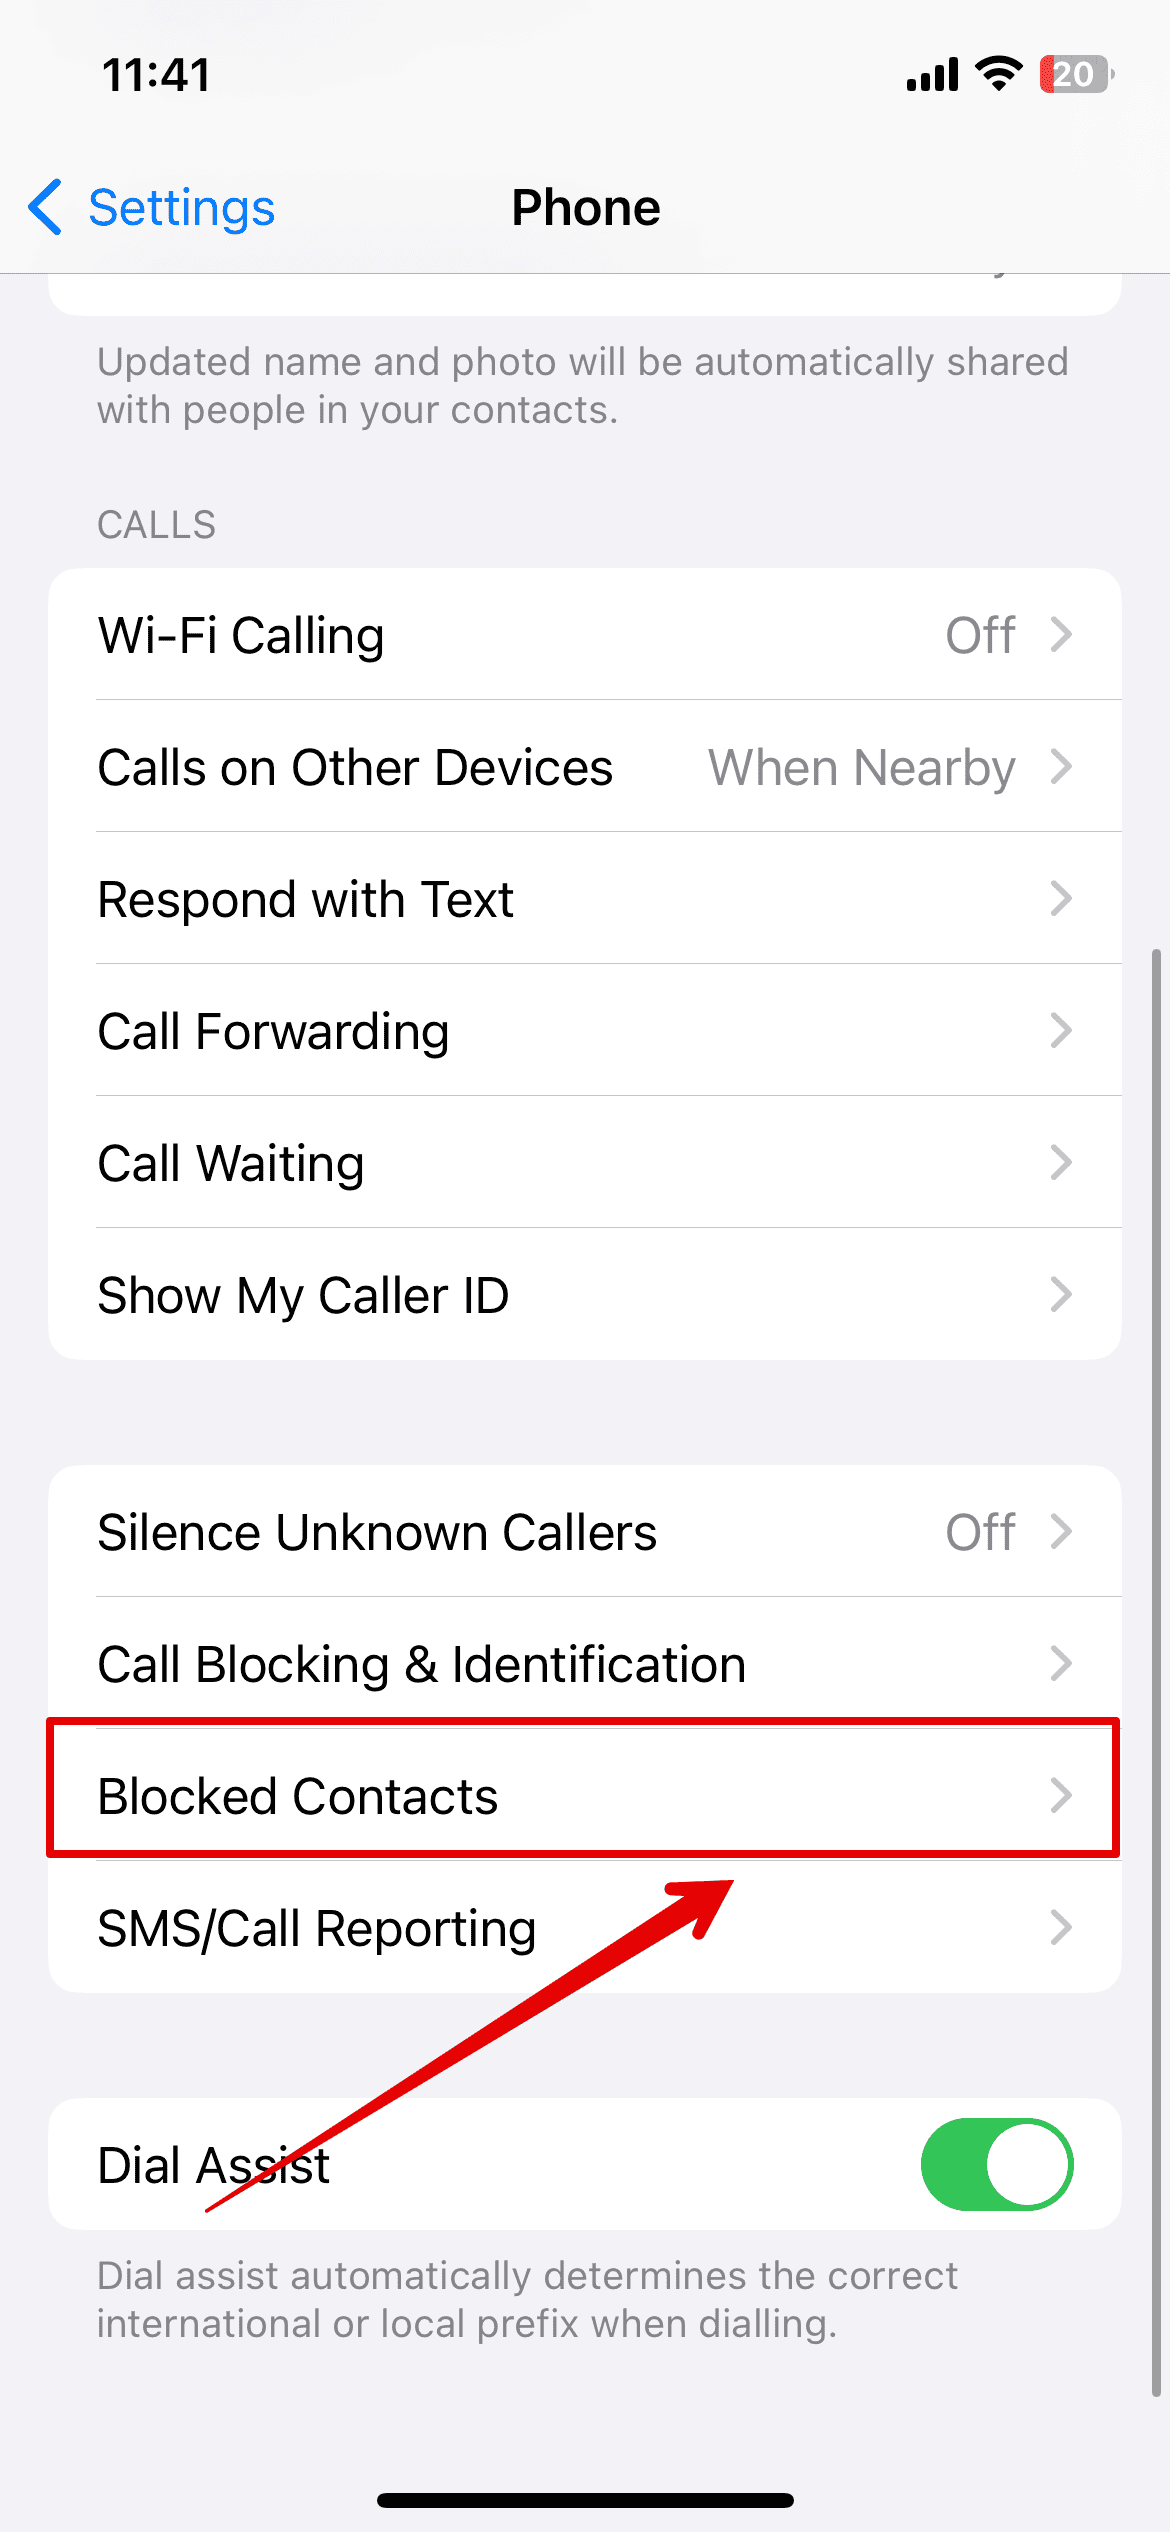 Check the list of Blocked Contacts